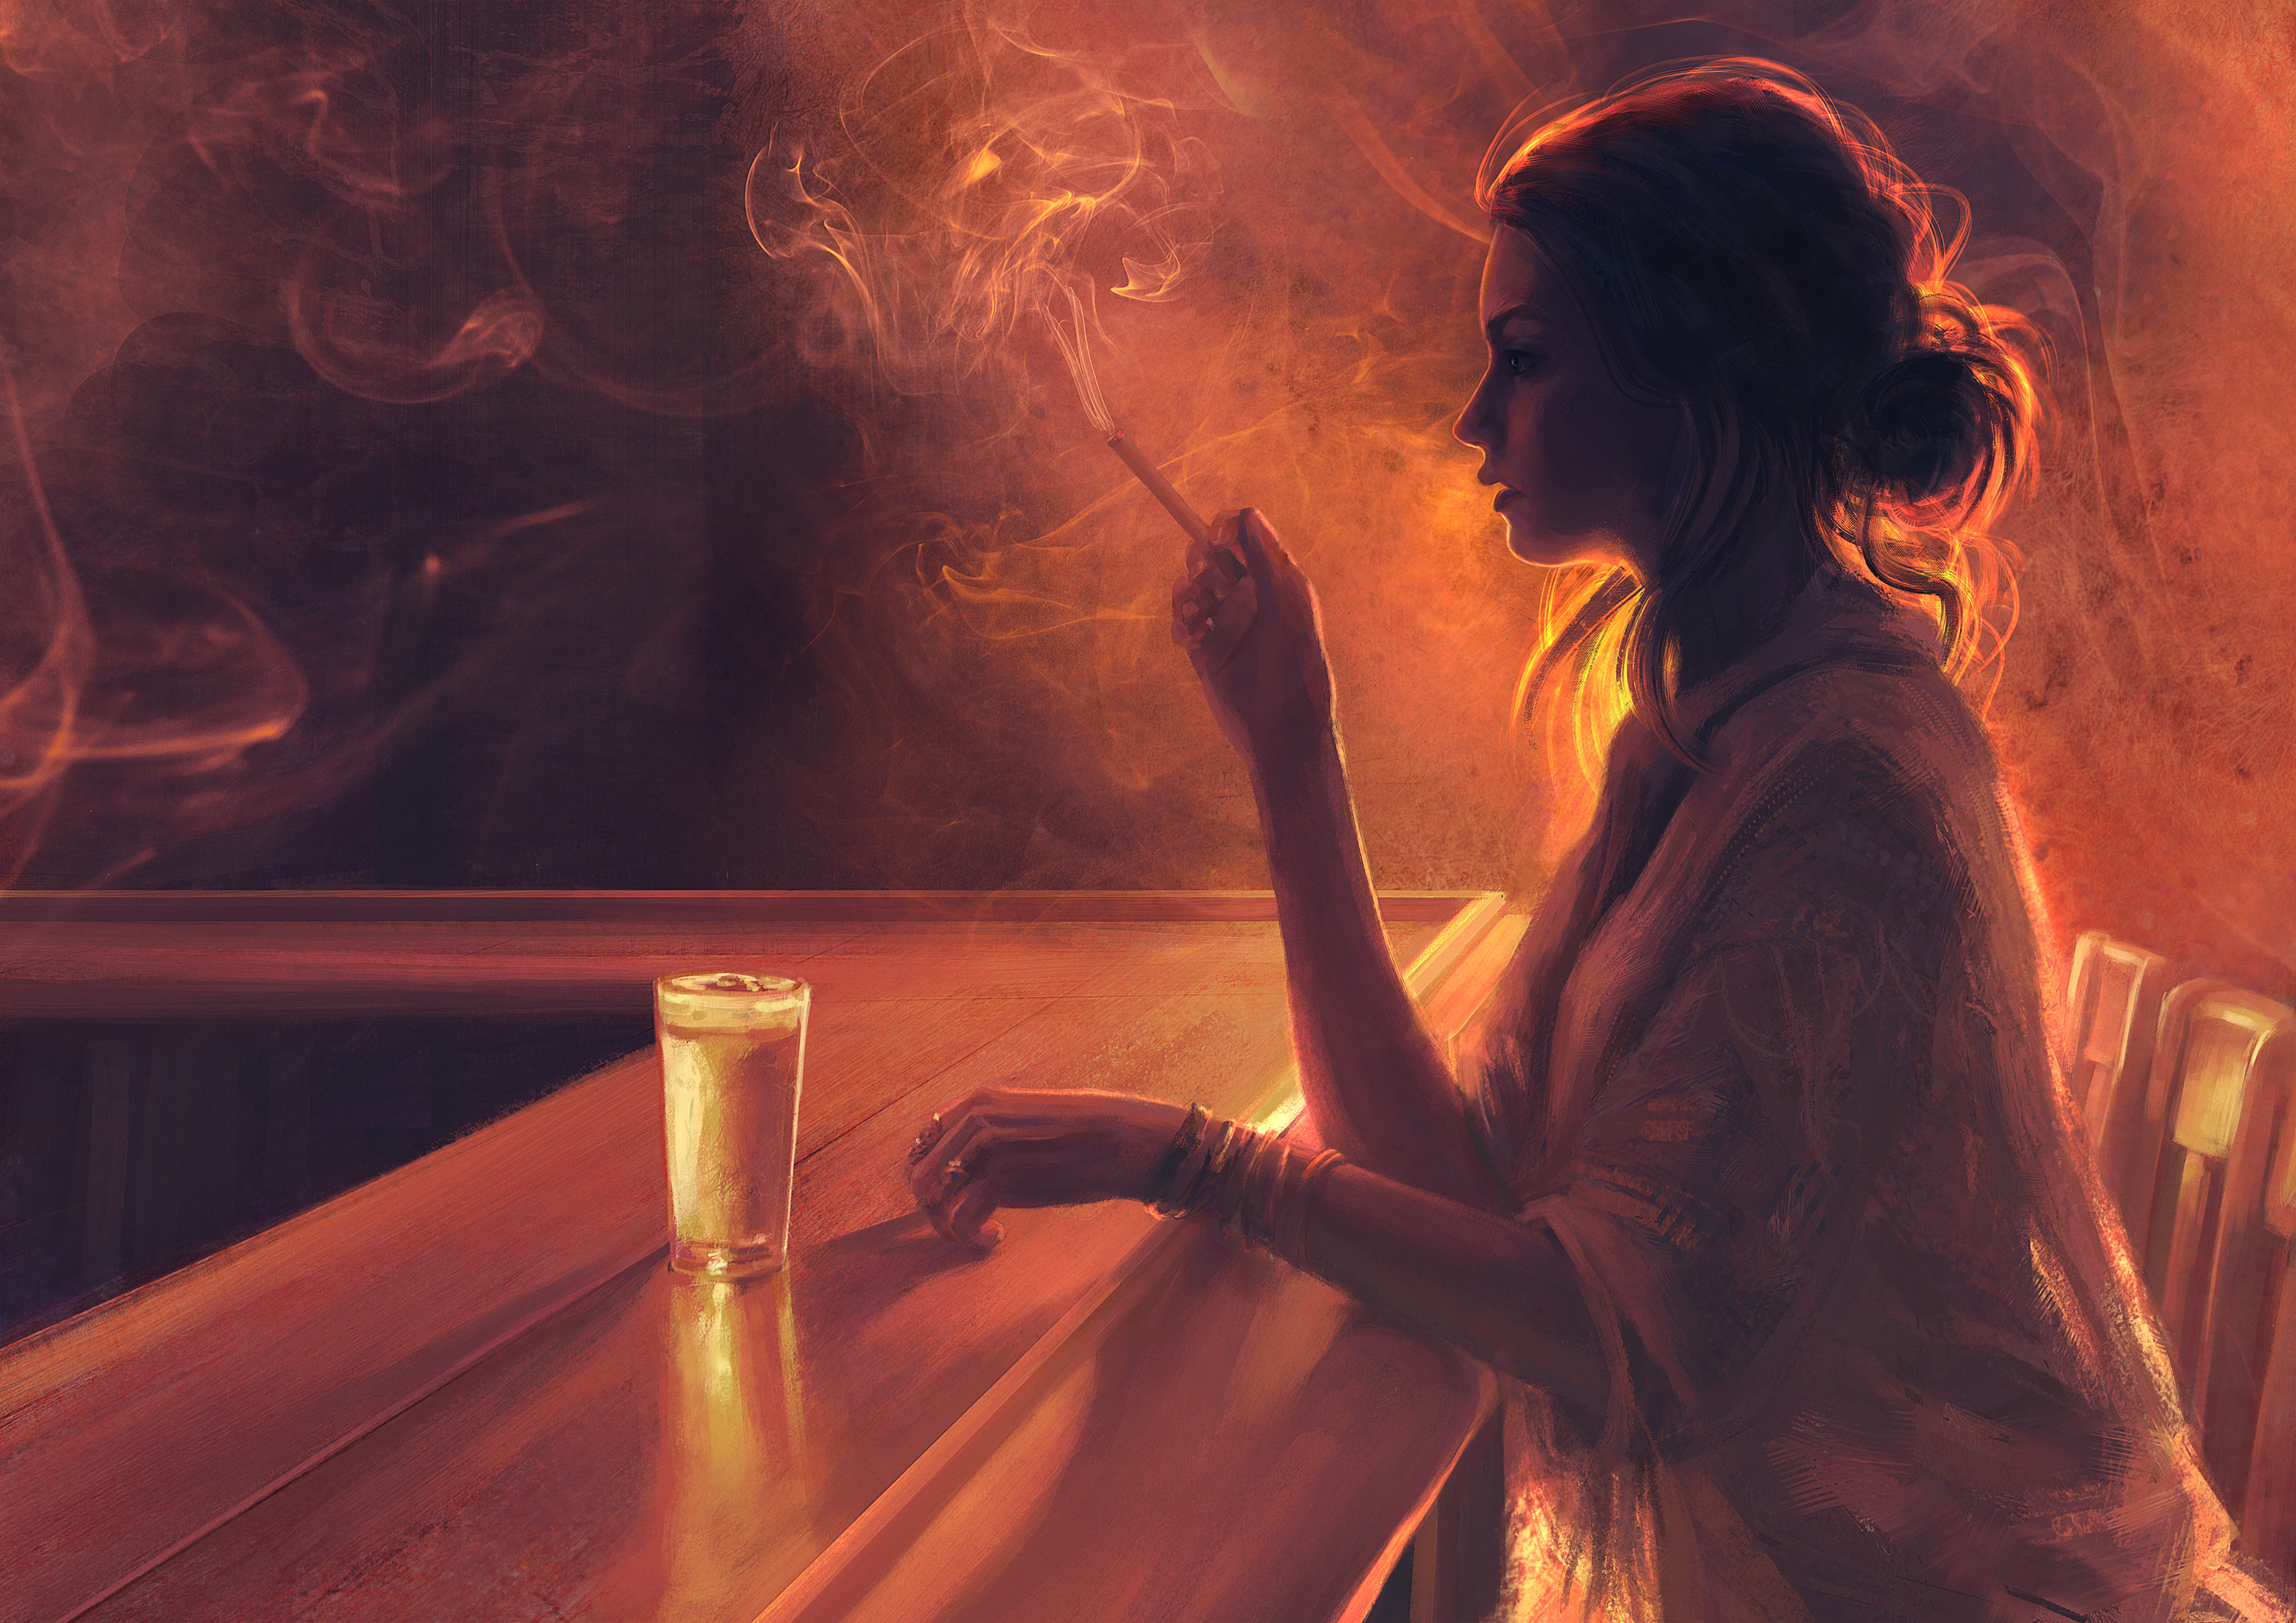 Painting of a Woman Alone in a Bar by Mandy Jurgens